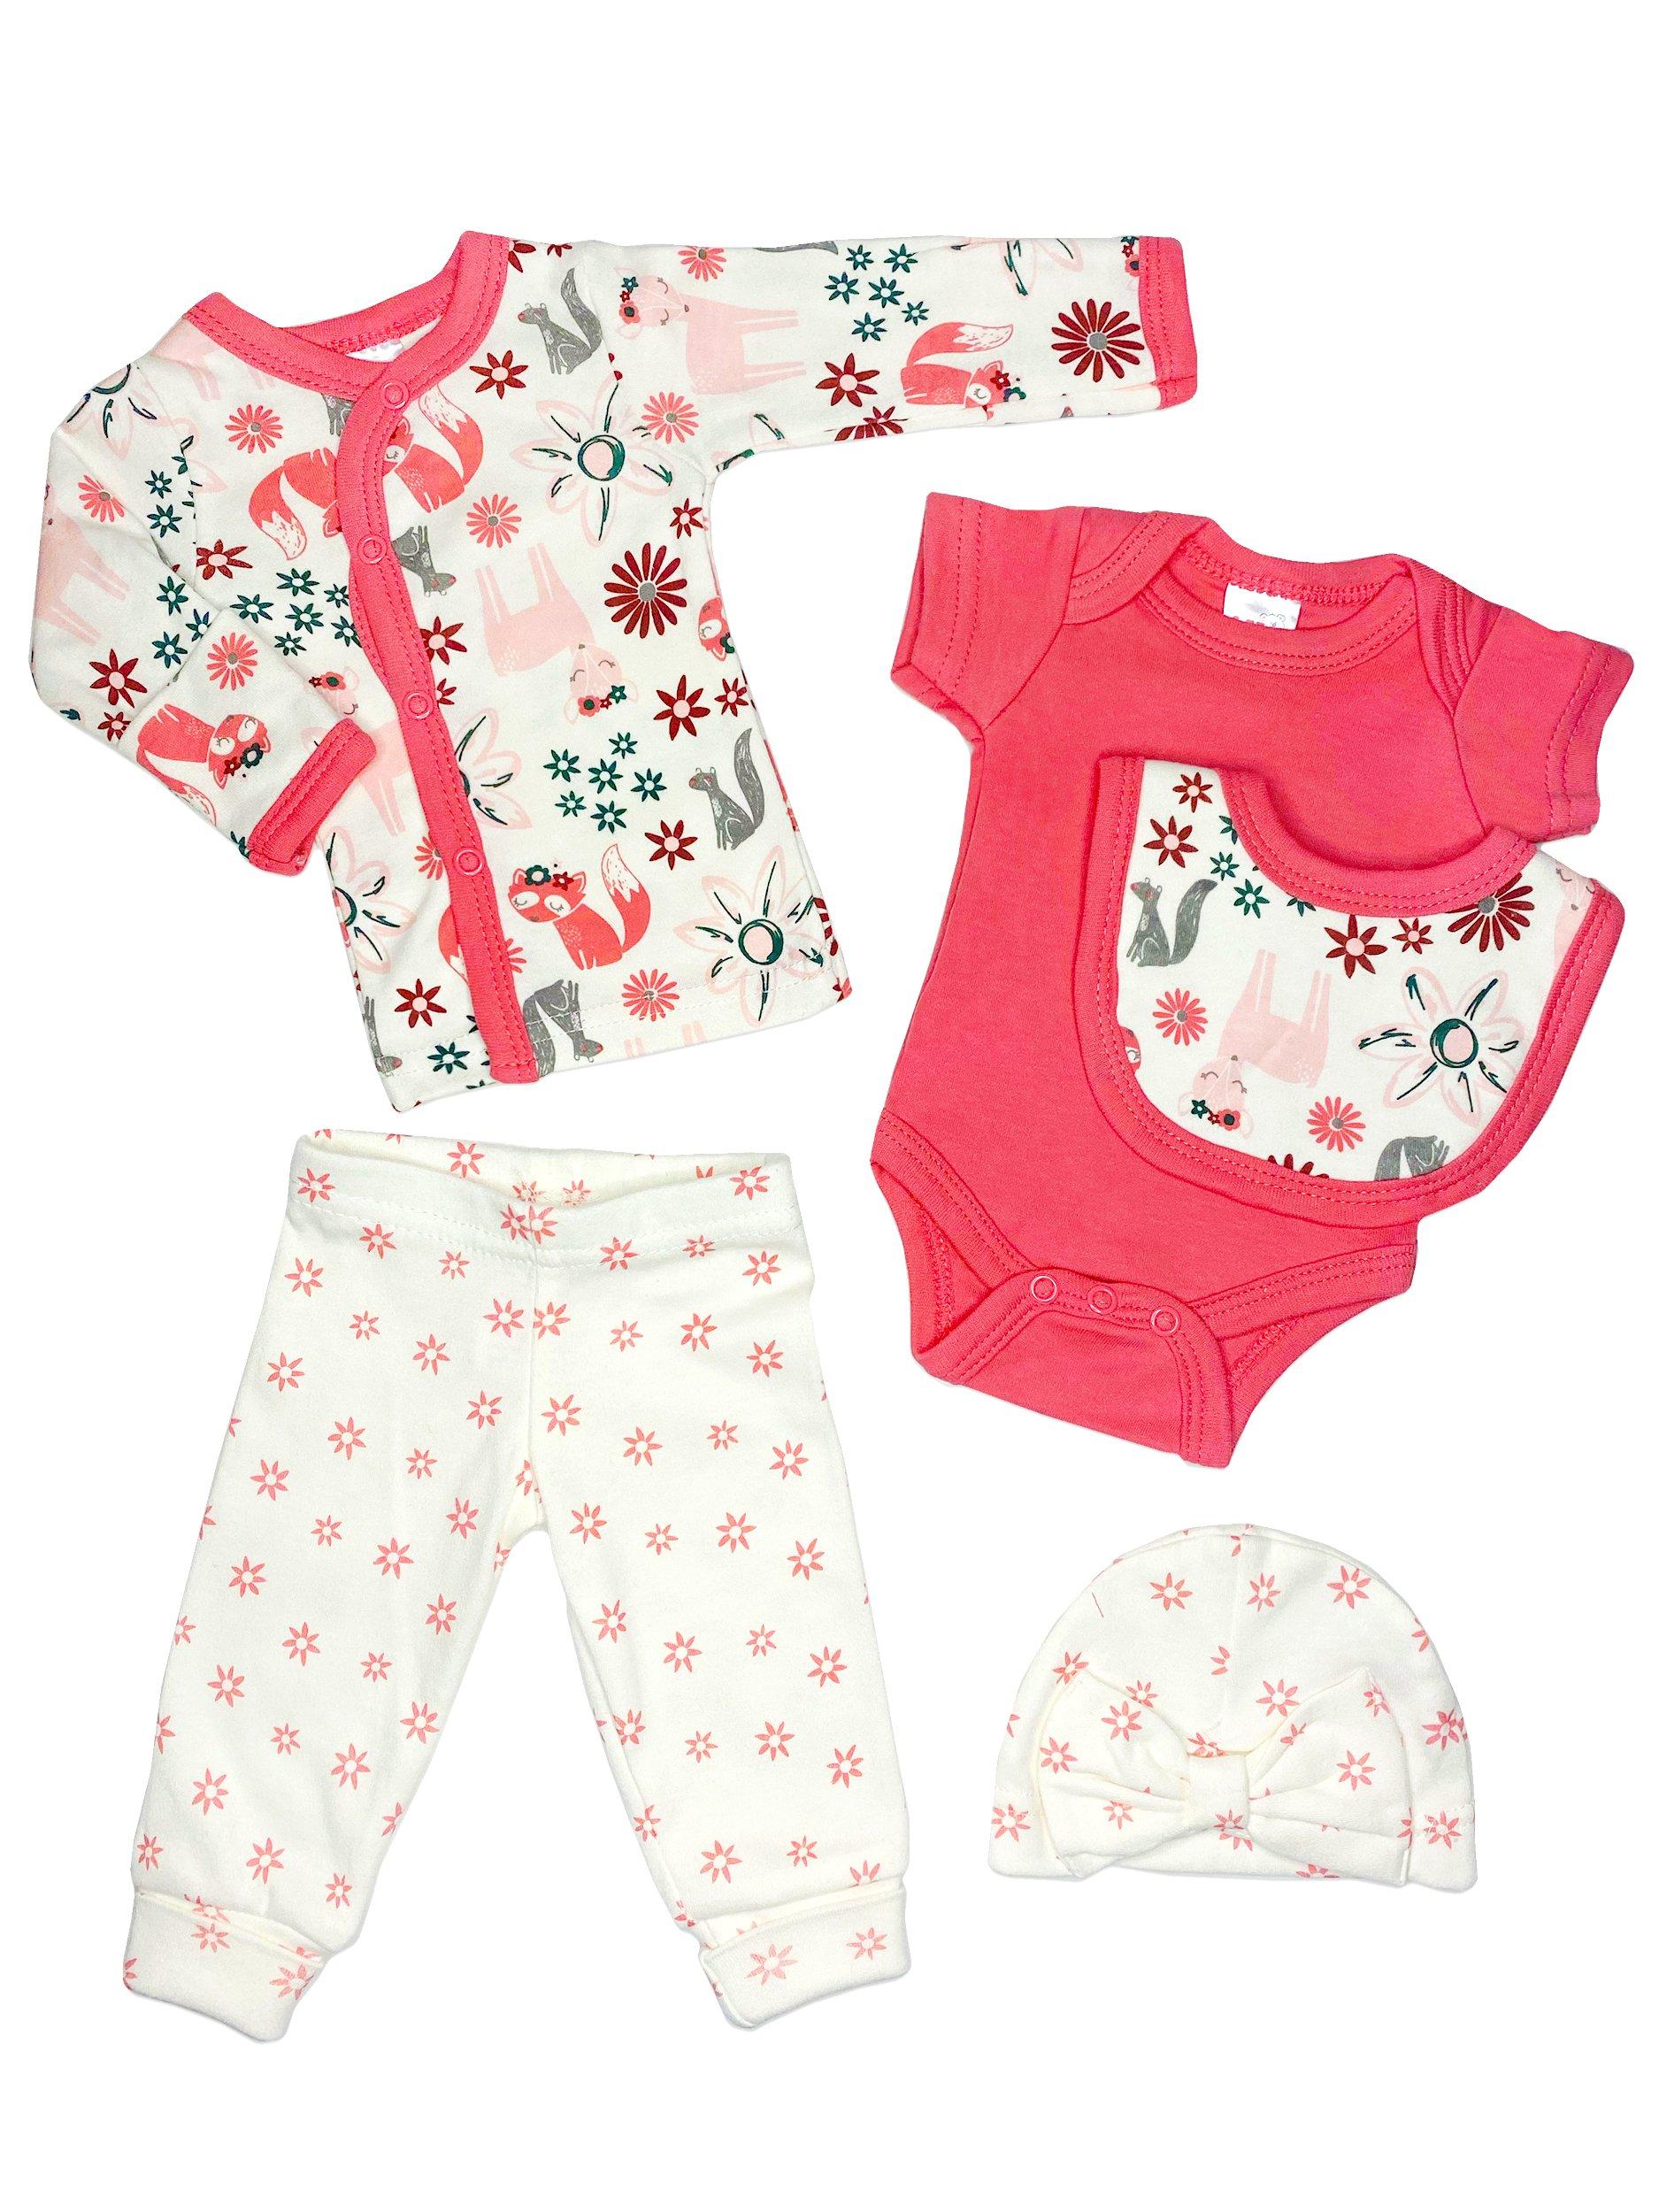 Pink Woodland Animals 5 piece set - Vest, Top, Trousers, Bib & Hat Outift Soft Touch 